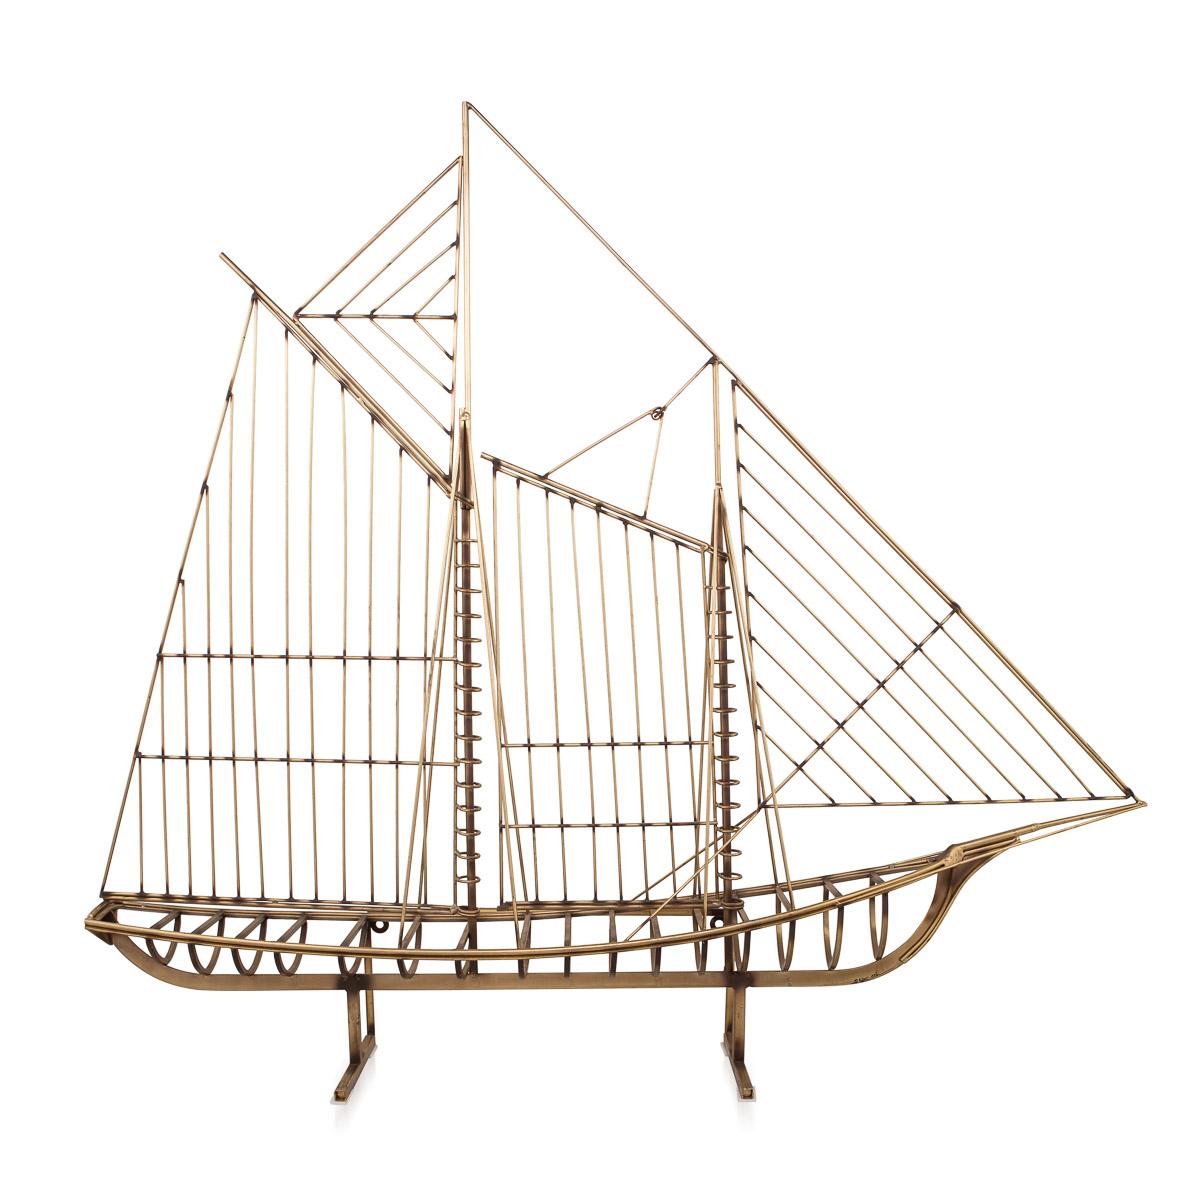 Stunning 20th century brass Galleon ship, this large geometric ship was created by Curtis Freiler & Jerry Fels. The name of the artist and furniture designer Curtis Jeré was, in fact, the shared pseudonym of two individual American artists, Curtis